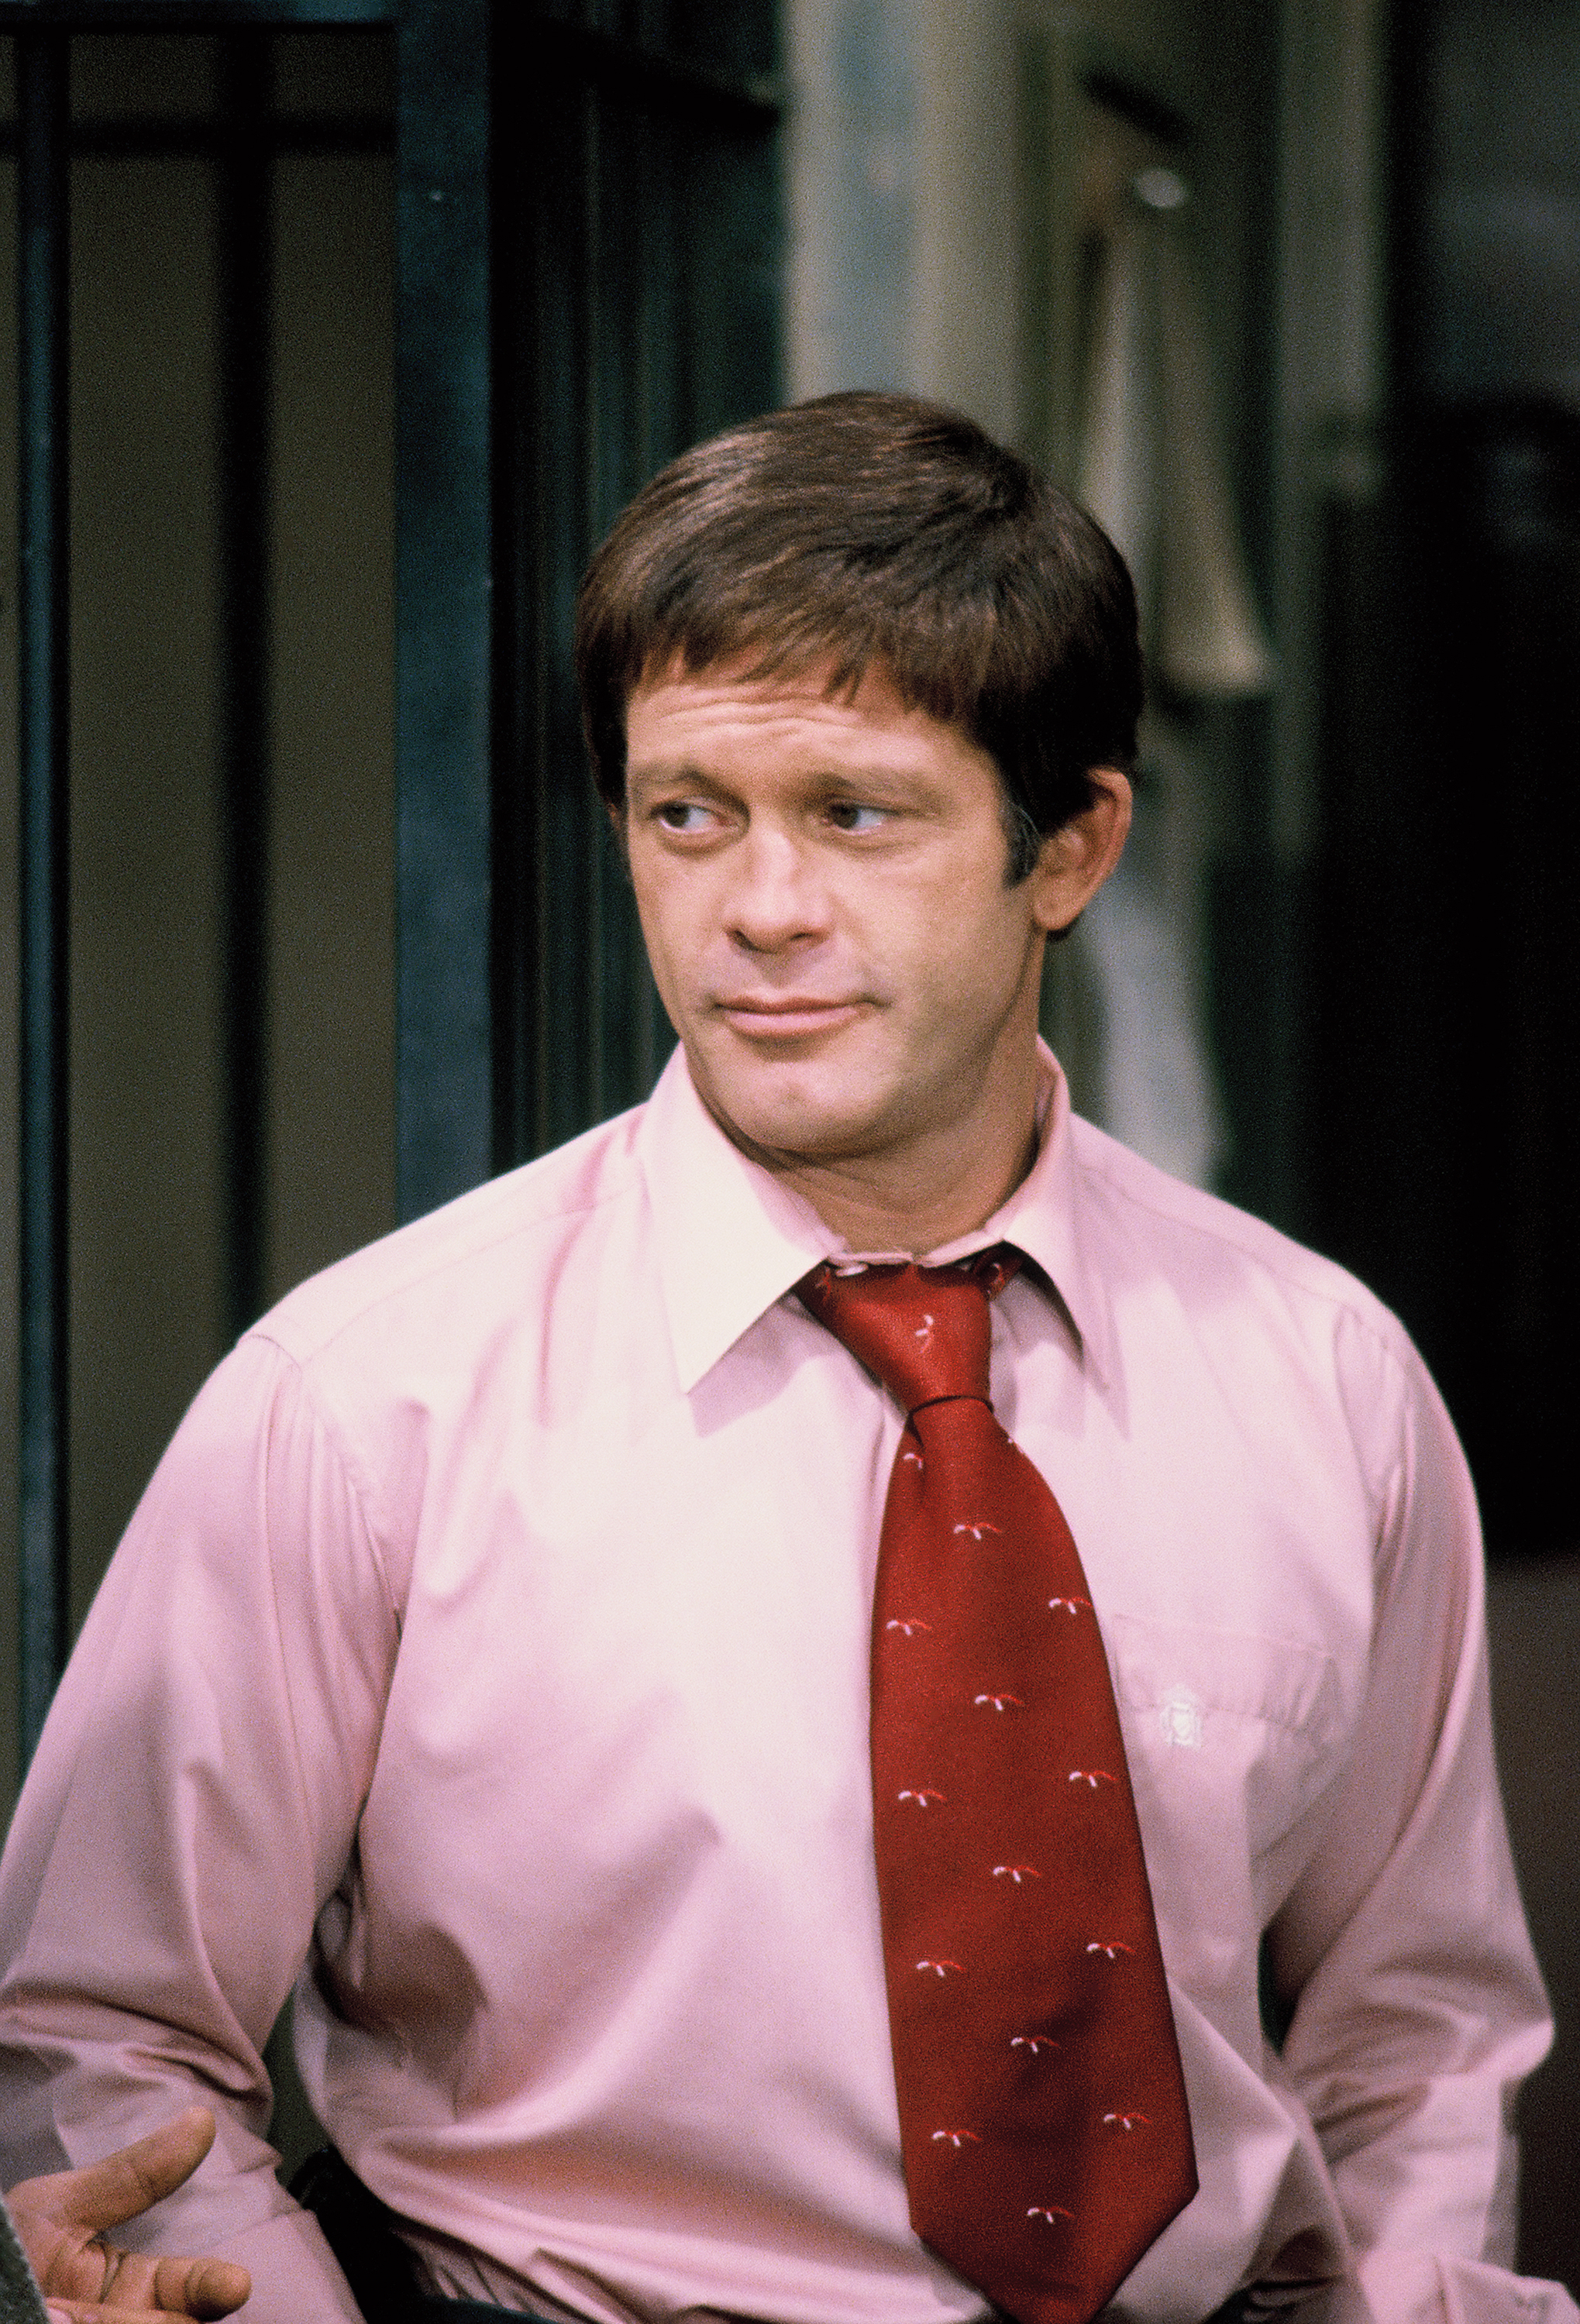 Max Gail as Detective Stanley Wojciehowicz in "Barney Miller" on November 26, 1981 | Source: Getty Images